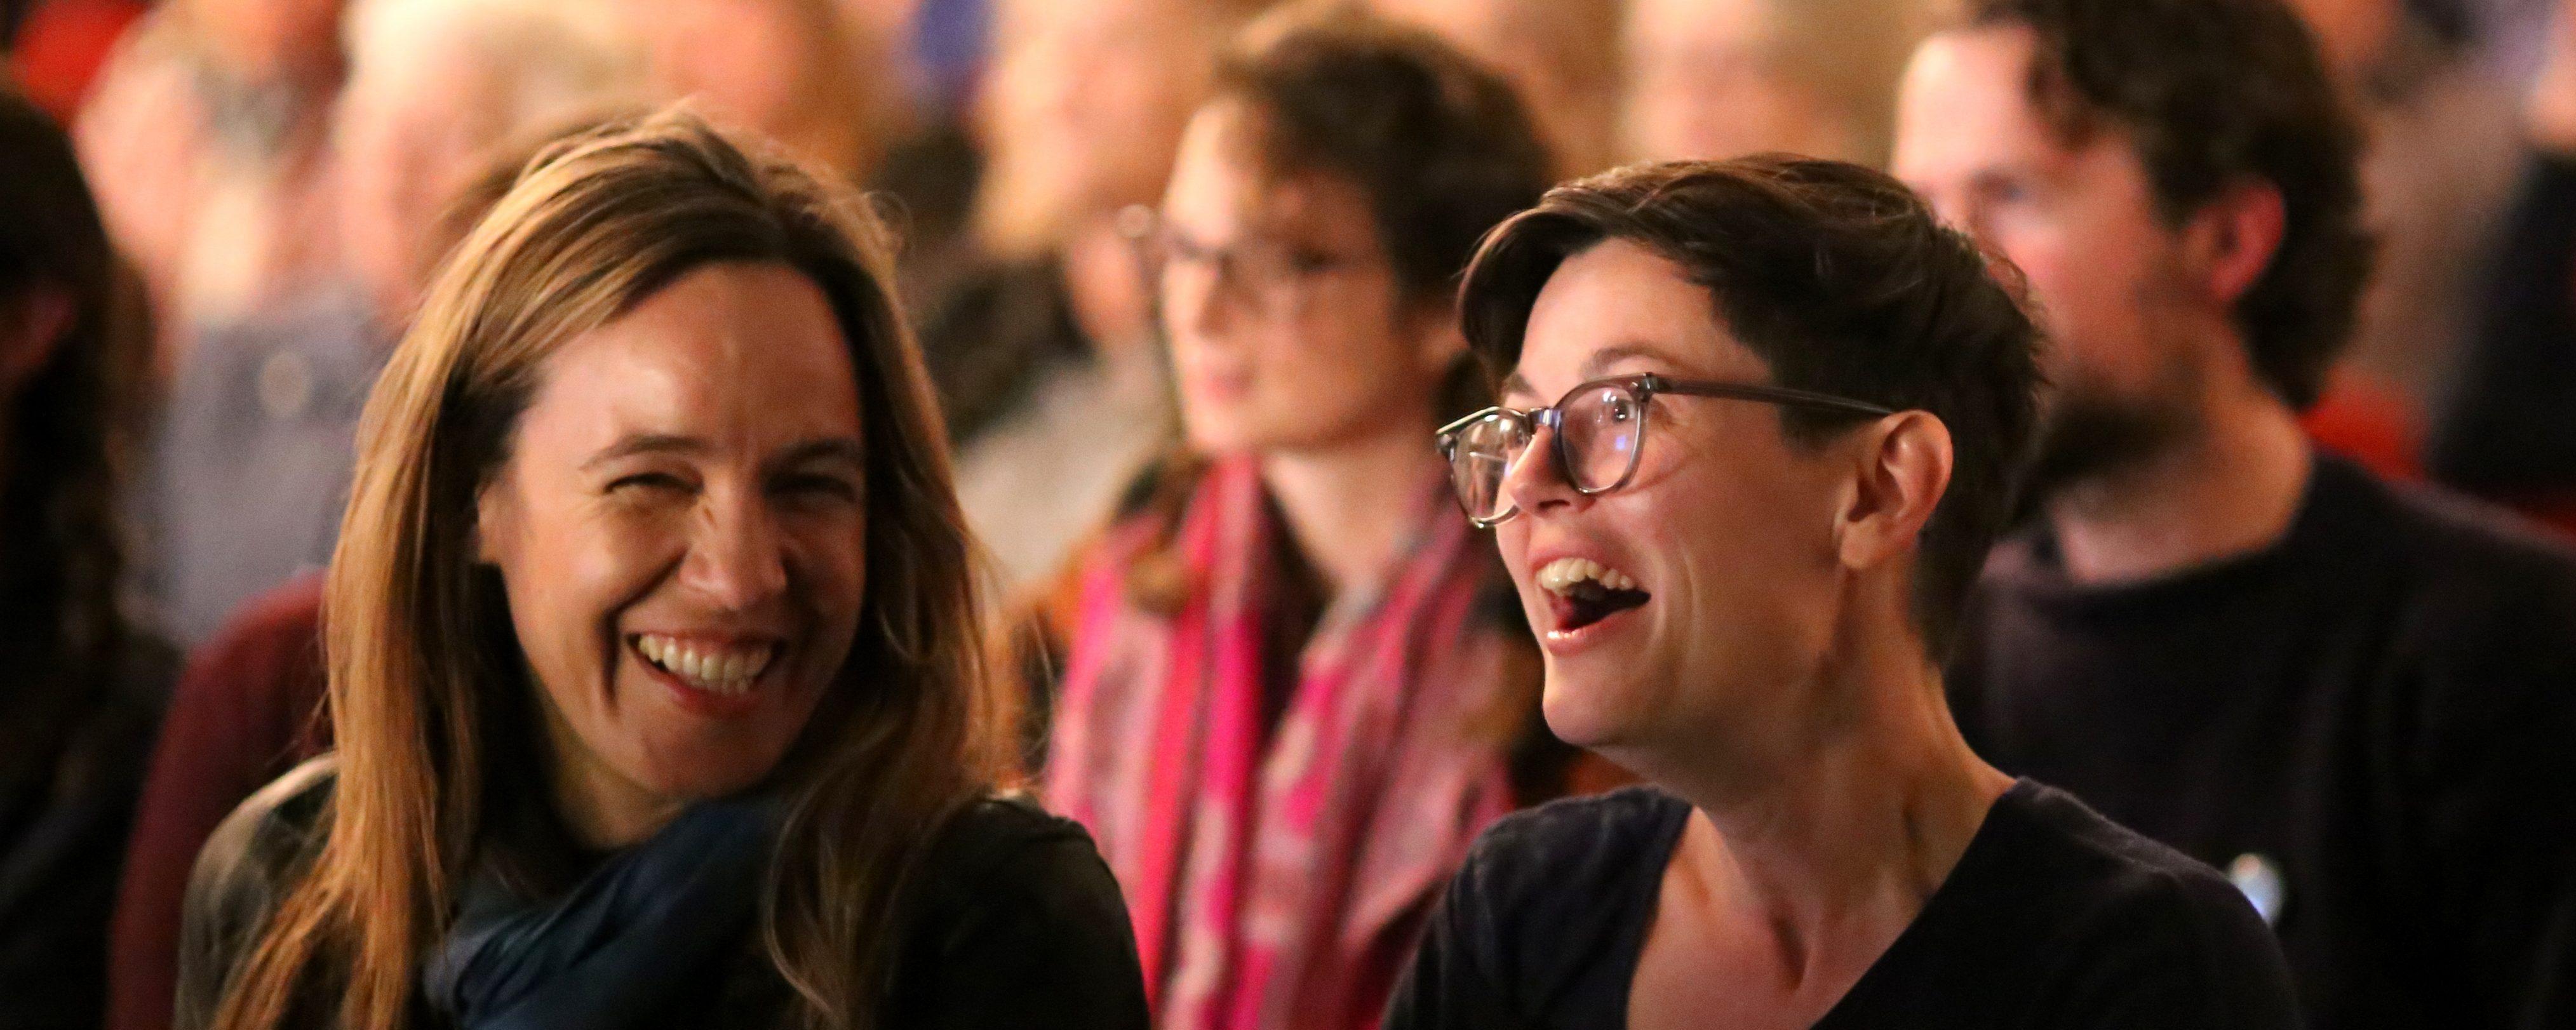 Members of an audience are laughing during an event at Wigtown Book Festival.